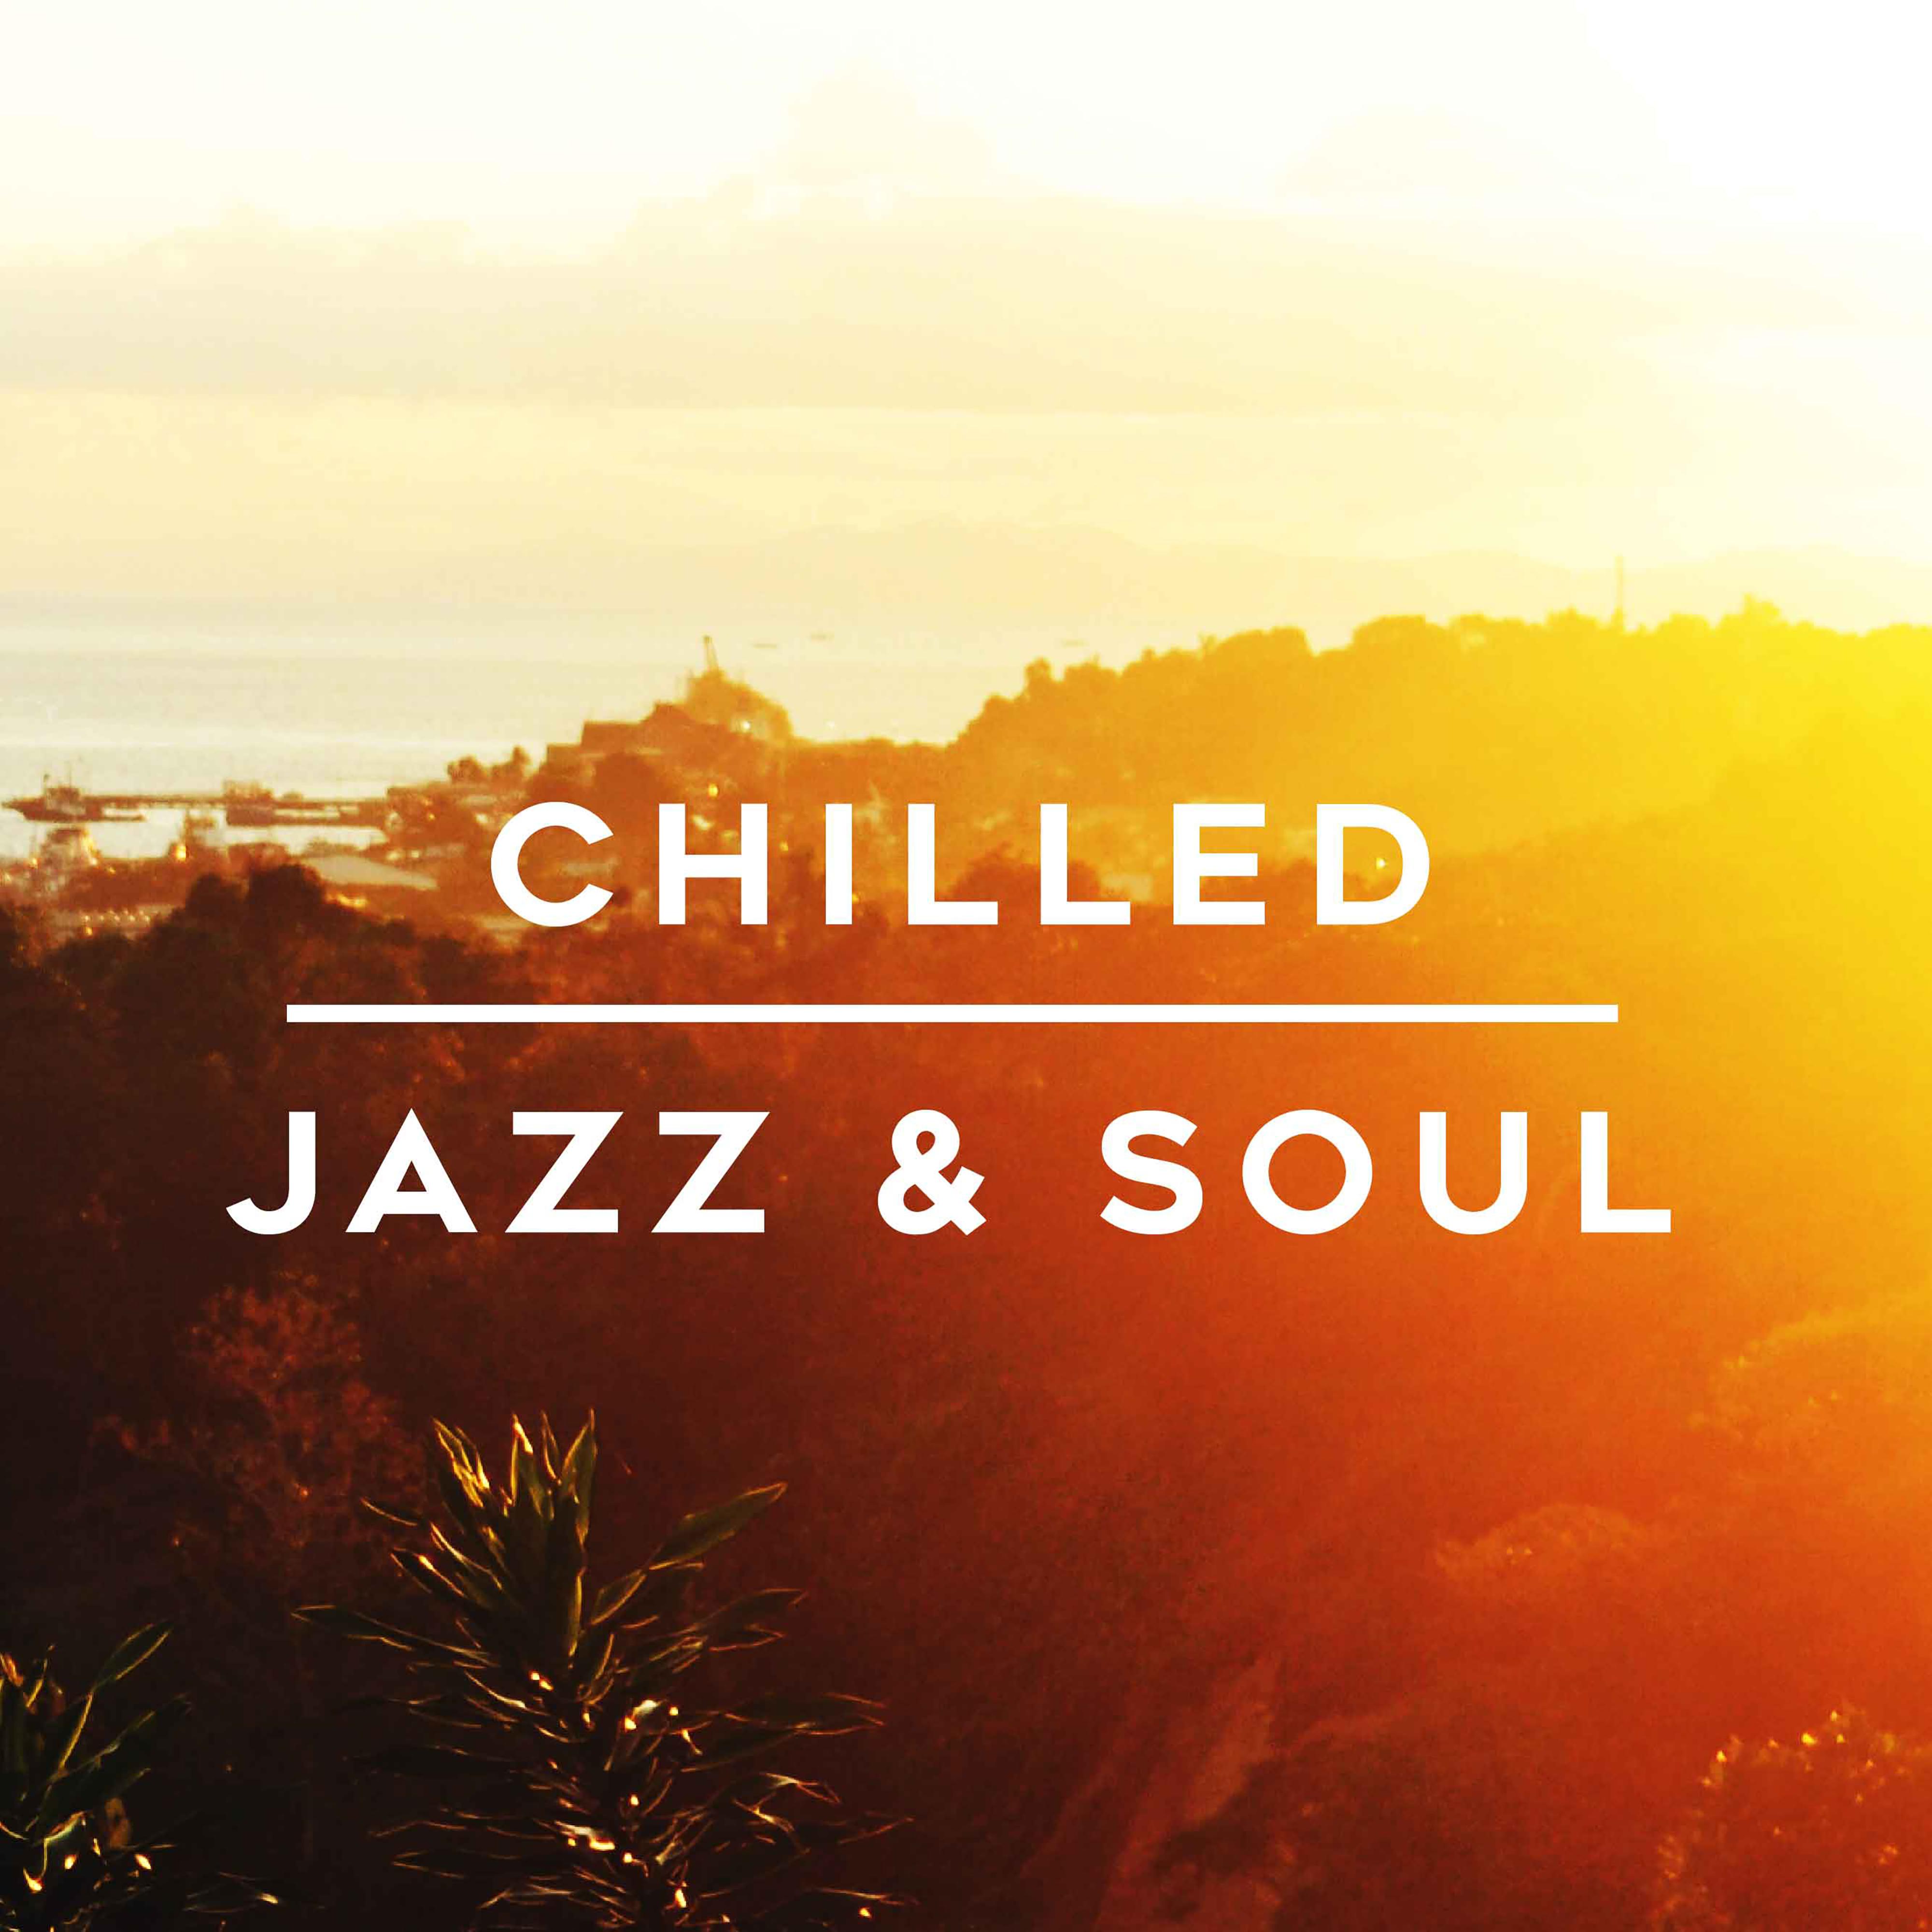 Chilled Jazz & Soul